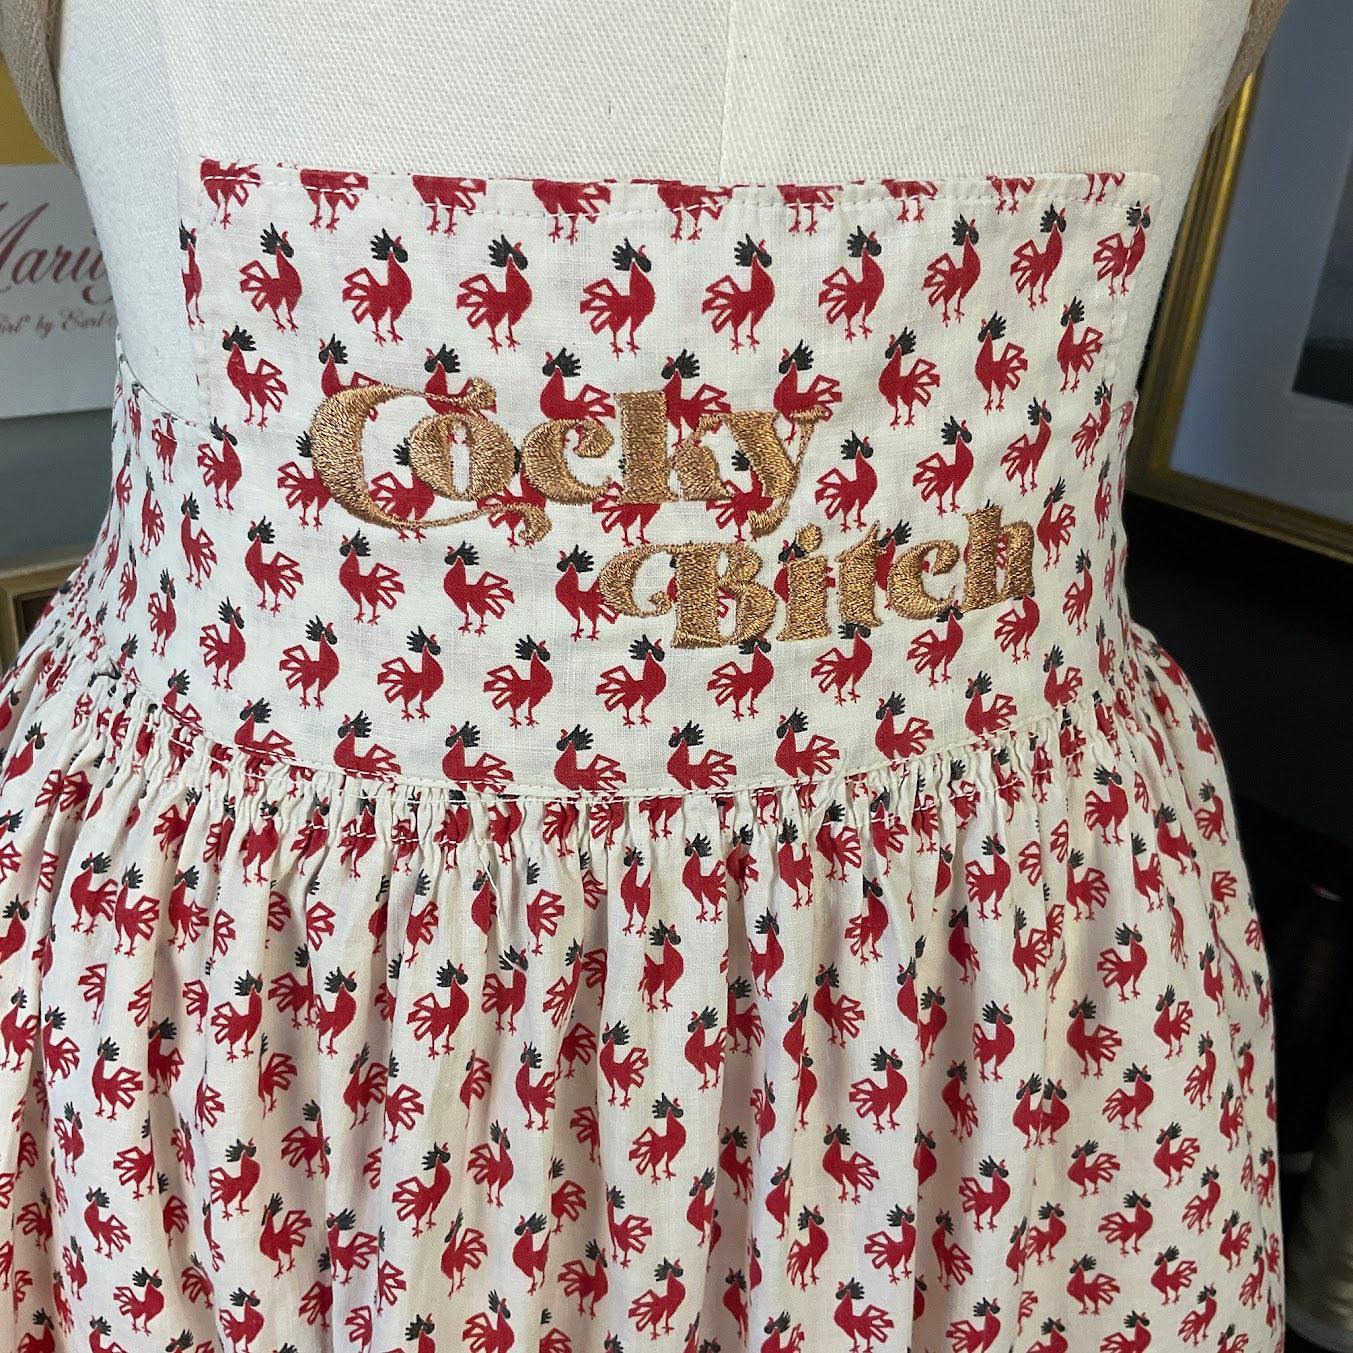 Cocky Bitch Apron (repeating cocks!) - Offensively Domestic